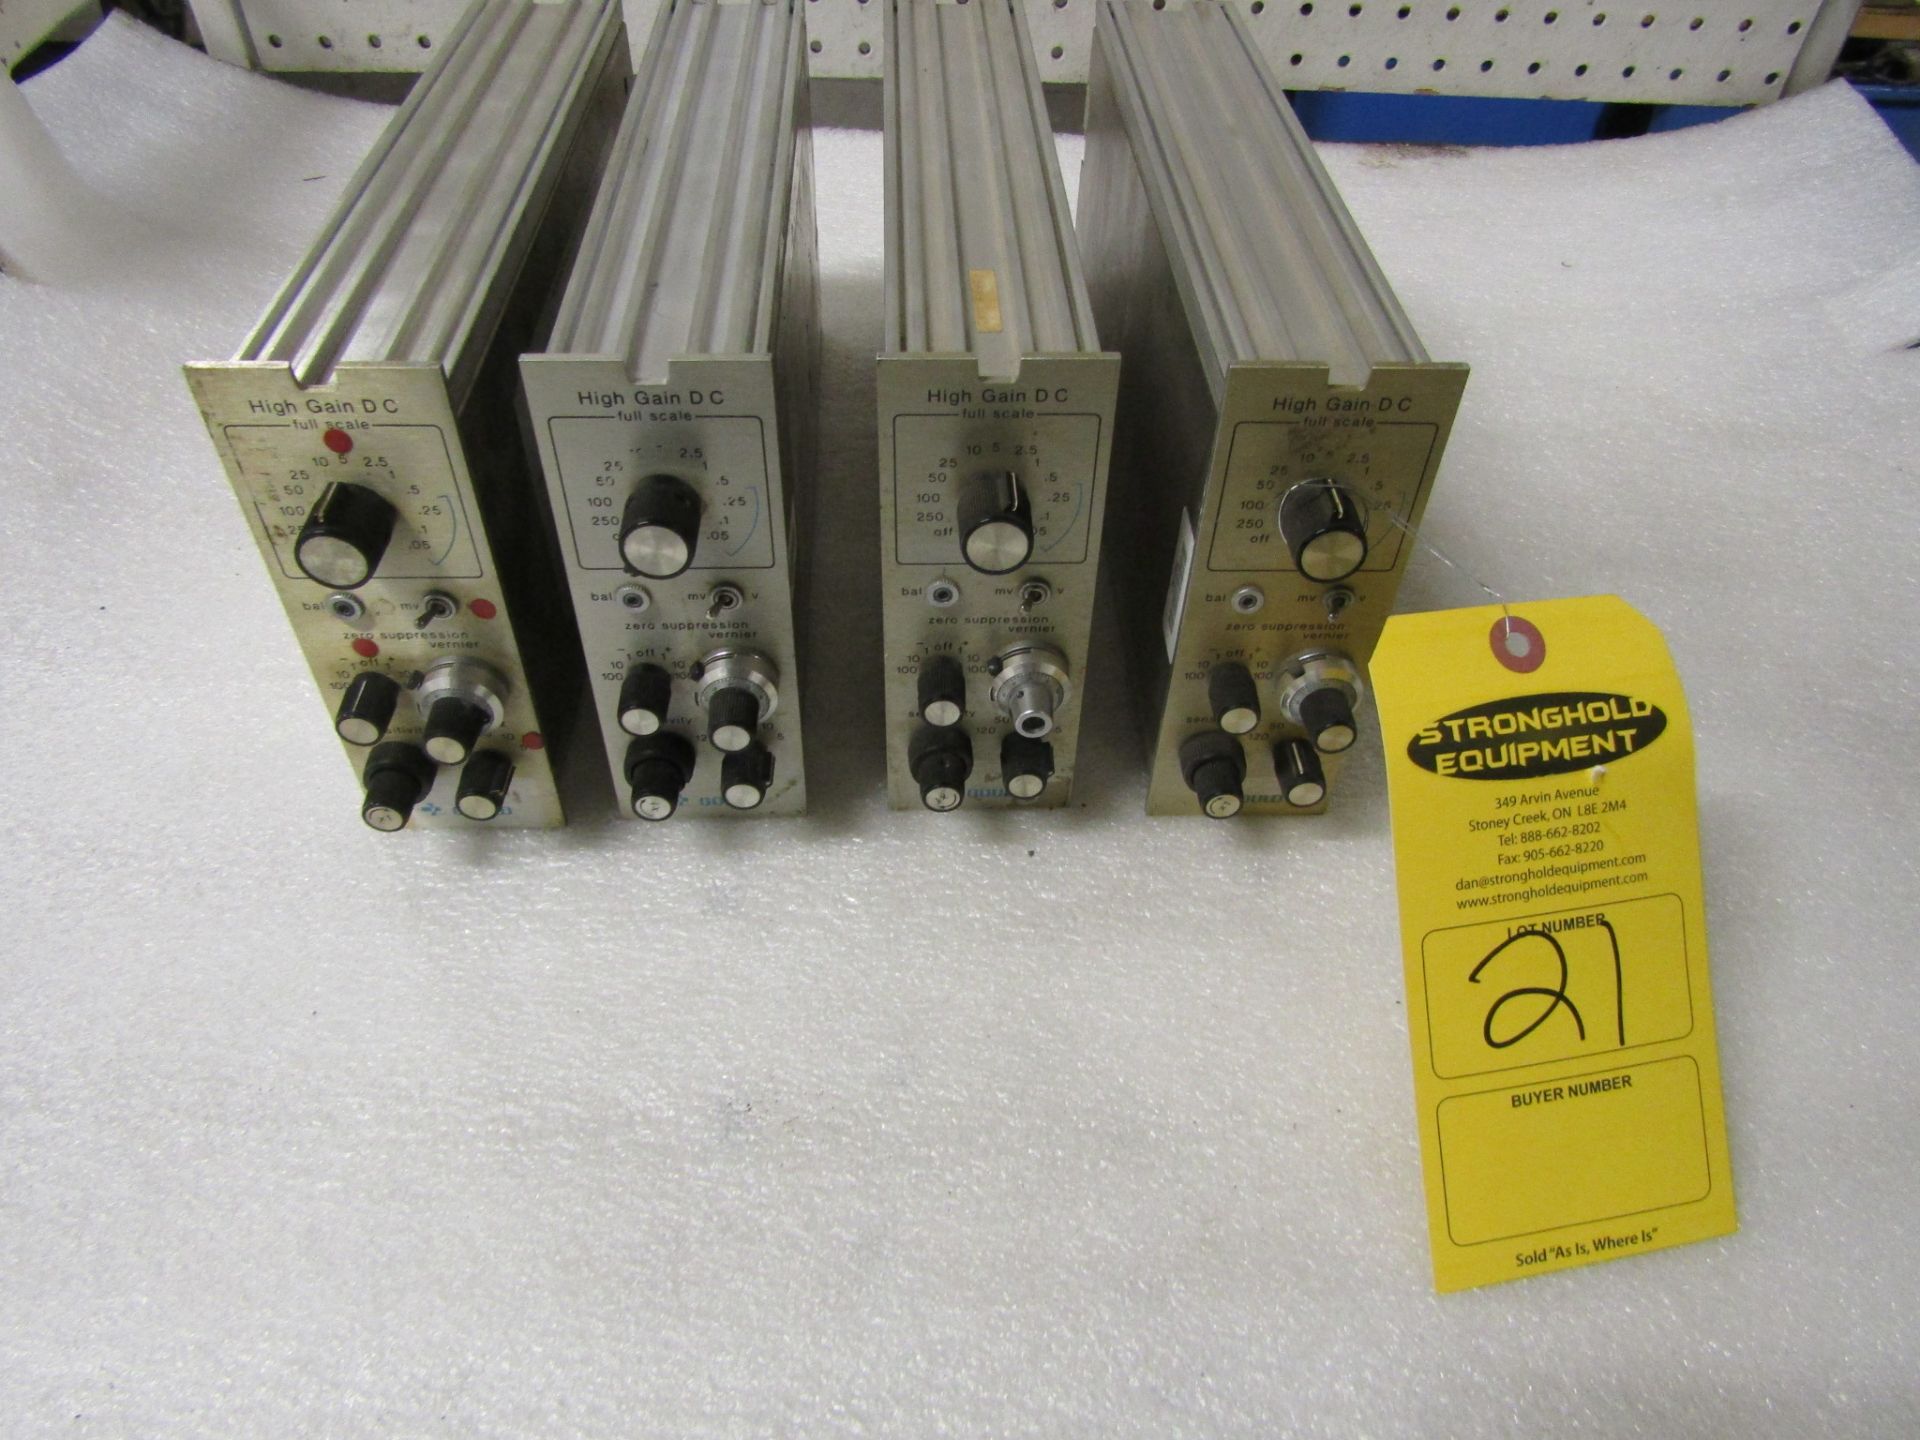 Lot of 4 (4 units) Gould High Gain DC Amplifiers